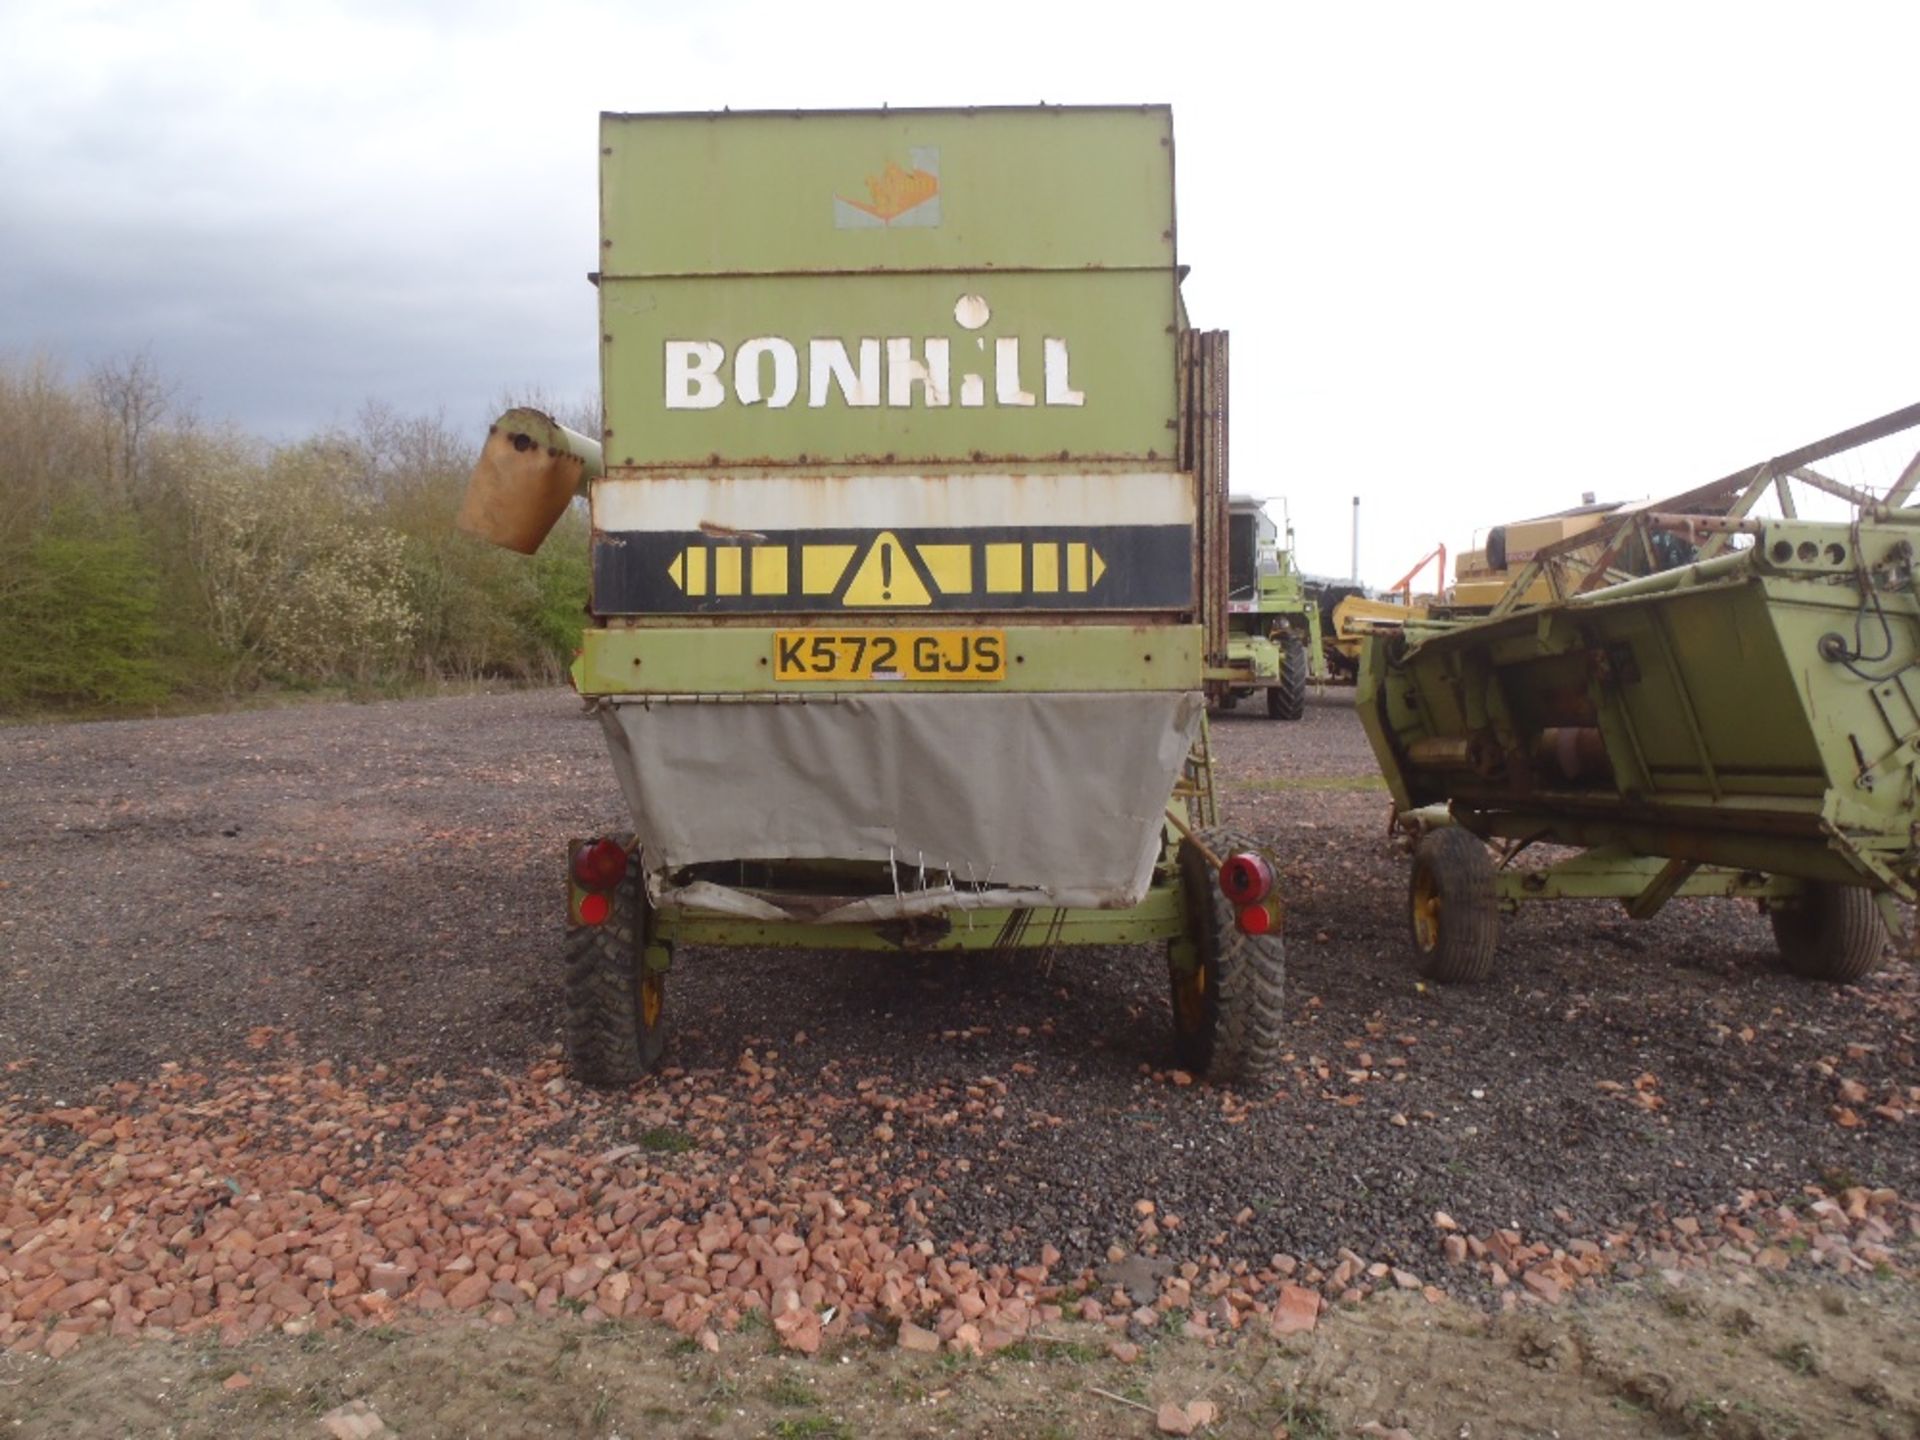 1993 Bonhill 14ft Combine and Trolley - Image 2 of 7